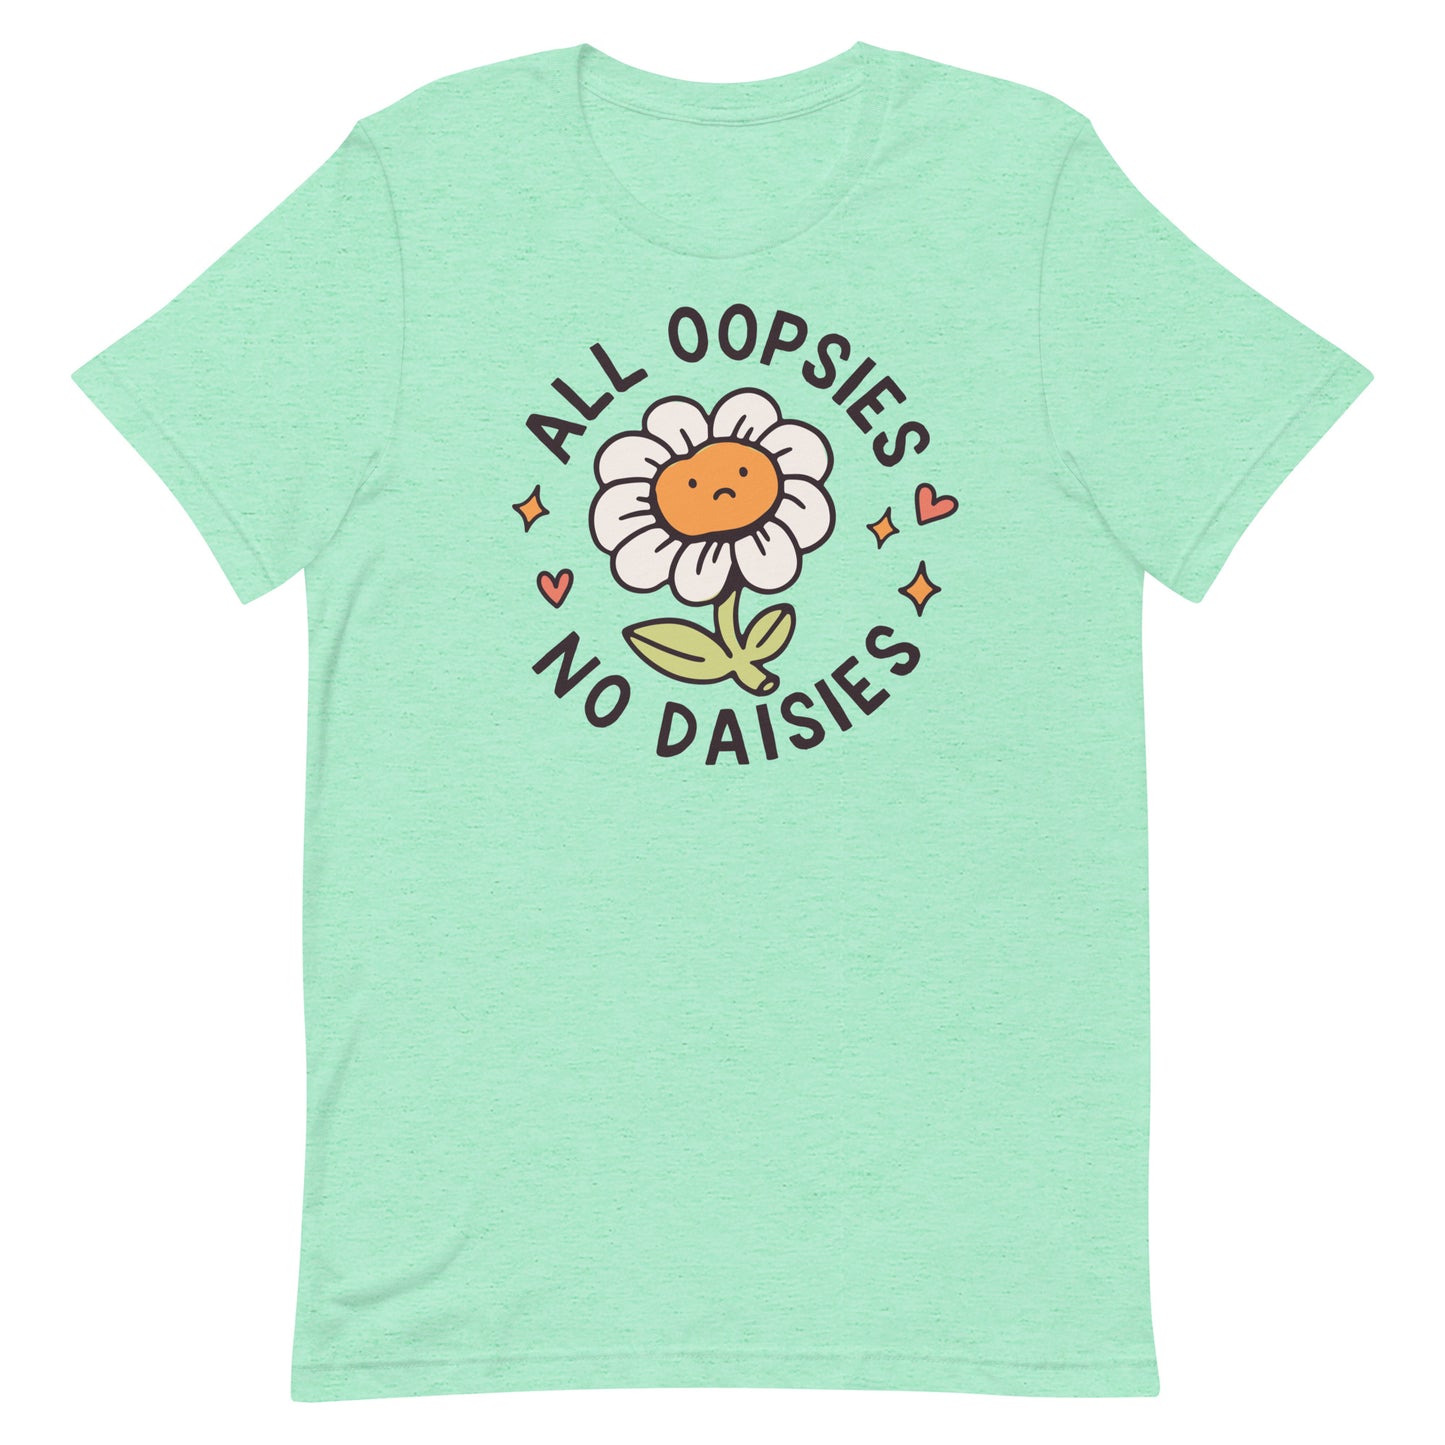 All Oopsies No Daises Unisex t-shirt